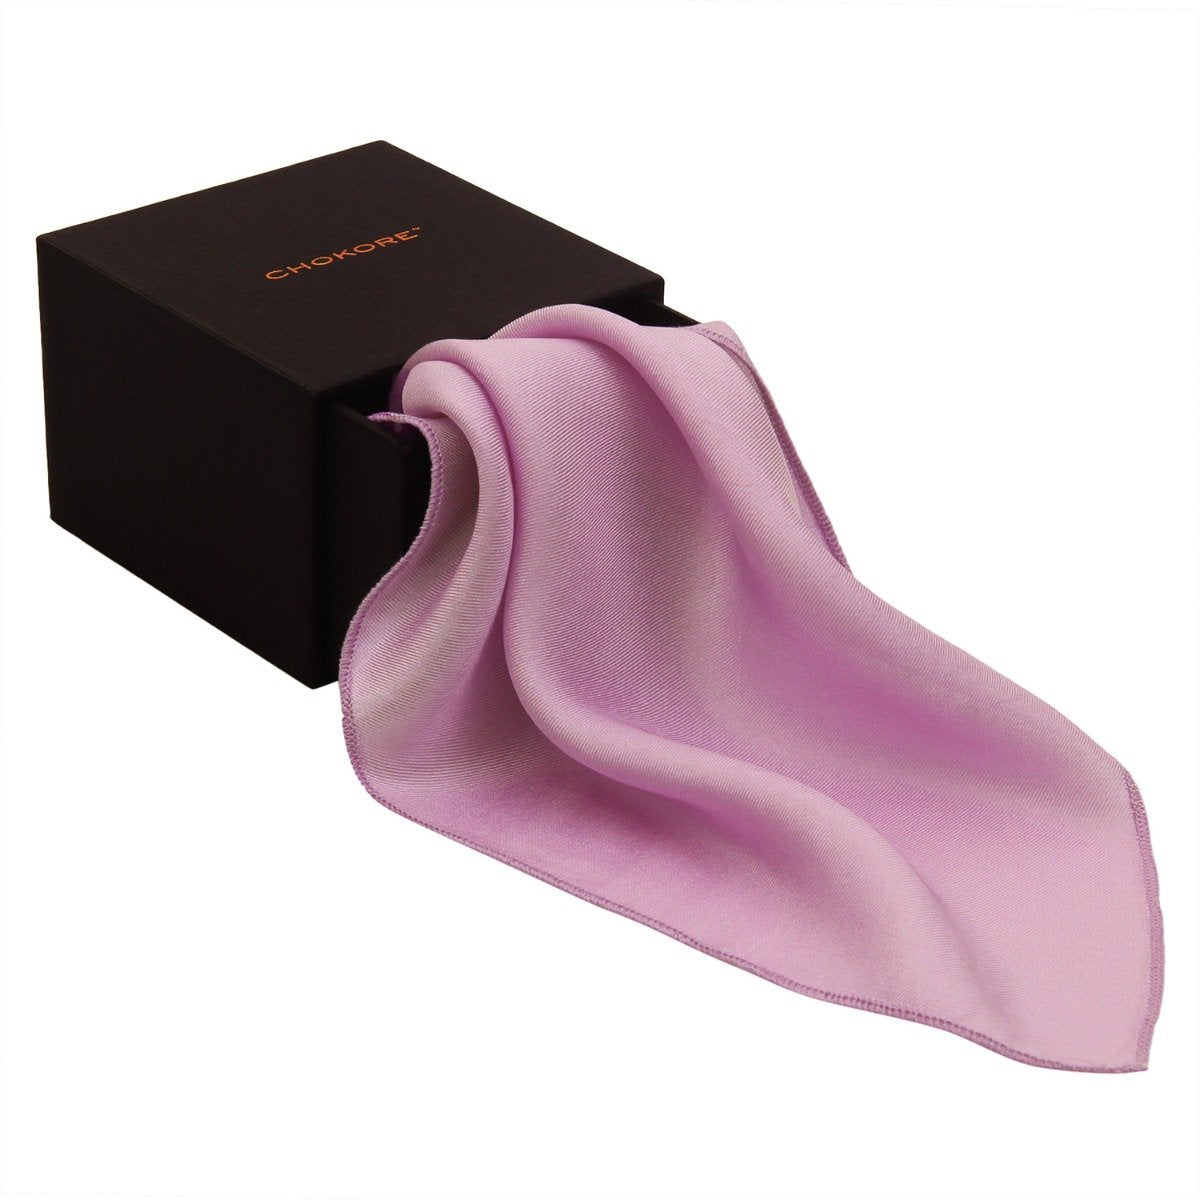 Chokore Violet Pure Silk Pocket Square, from the Solids Line